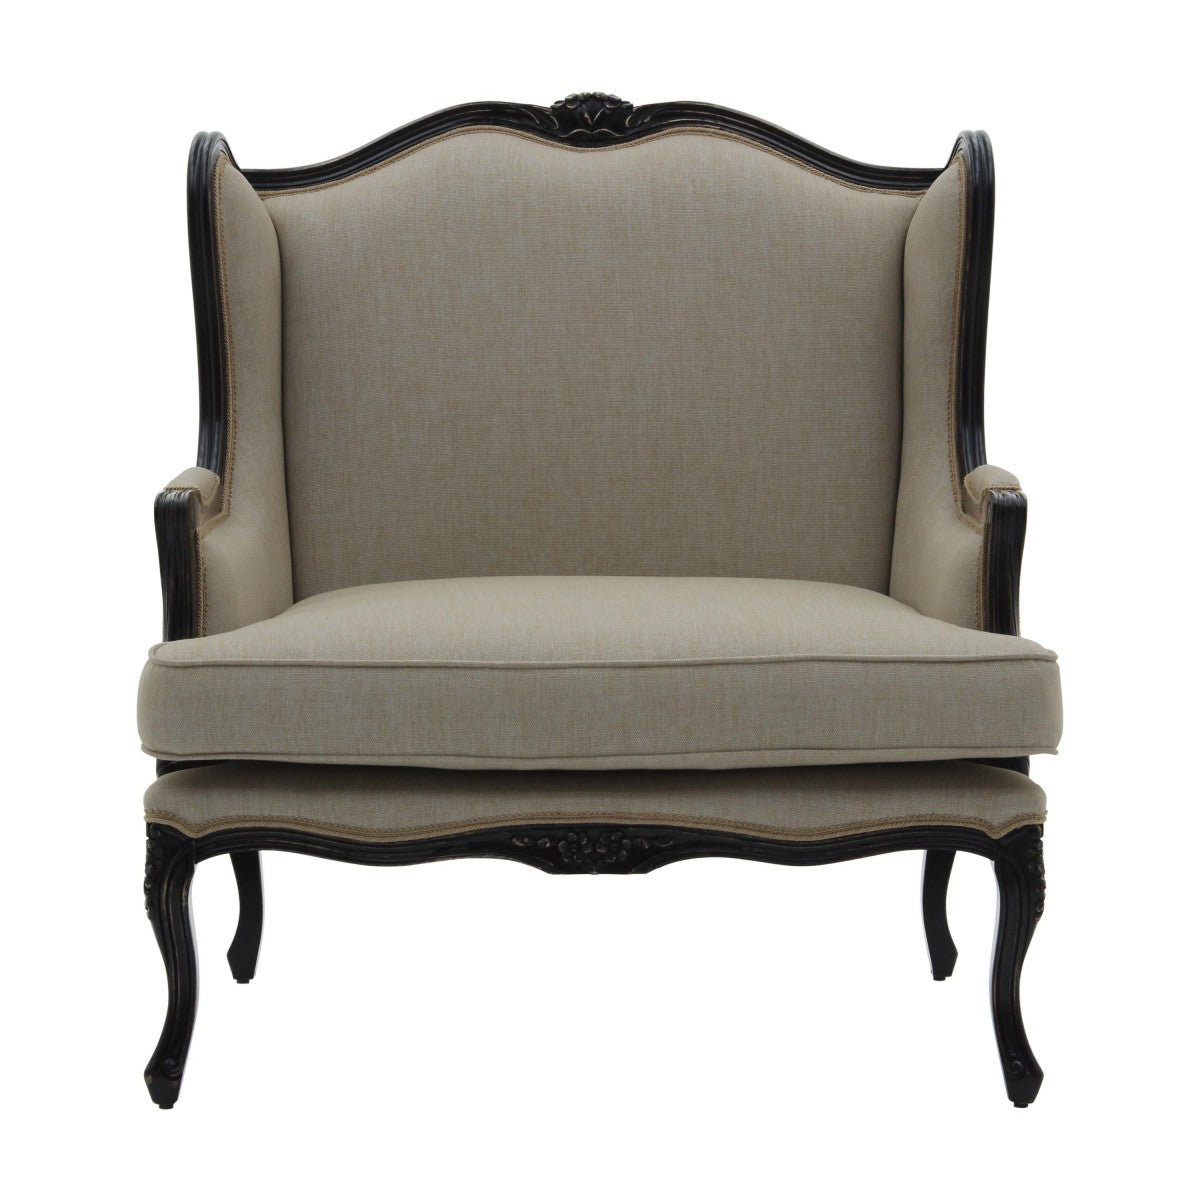 Stige Bespoke Upholstered Love Seat Wingback Armchair MS9896P Custom Made To Order